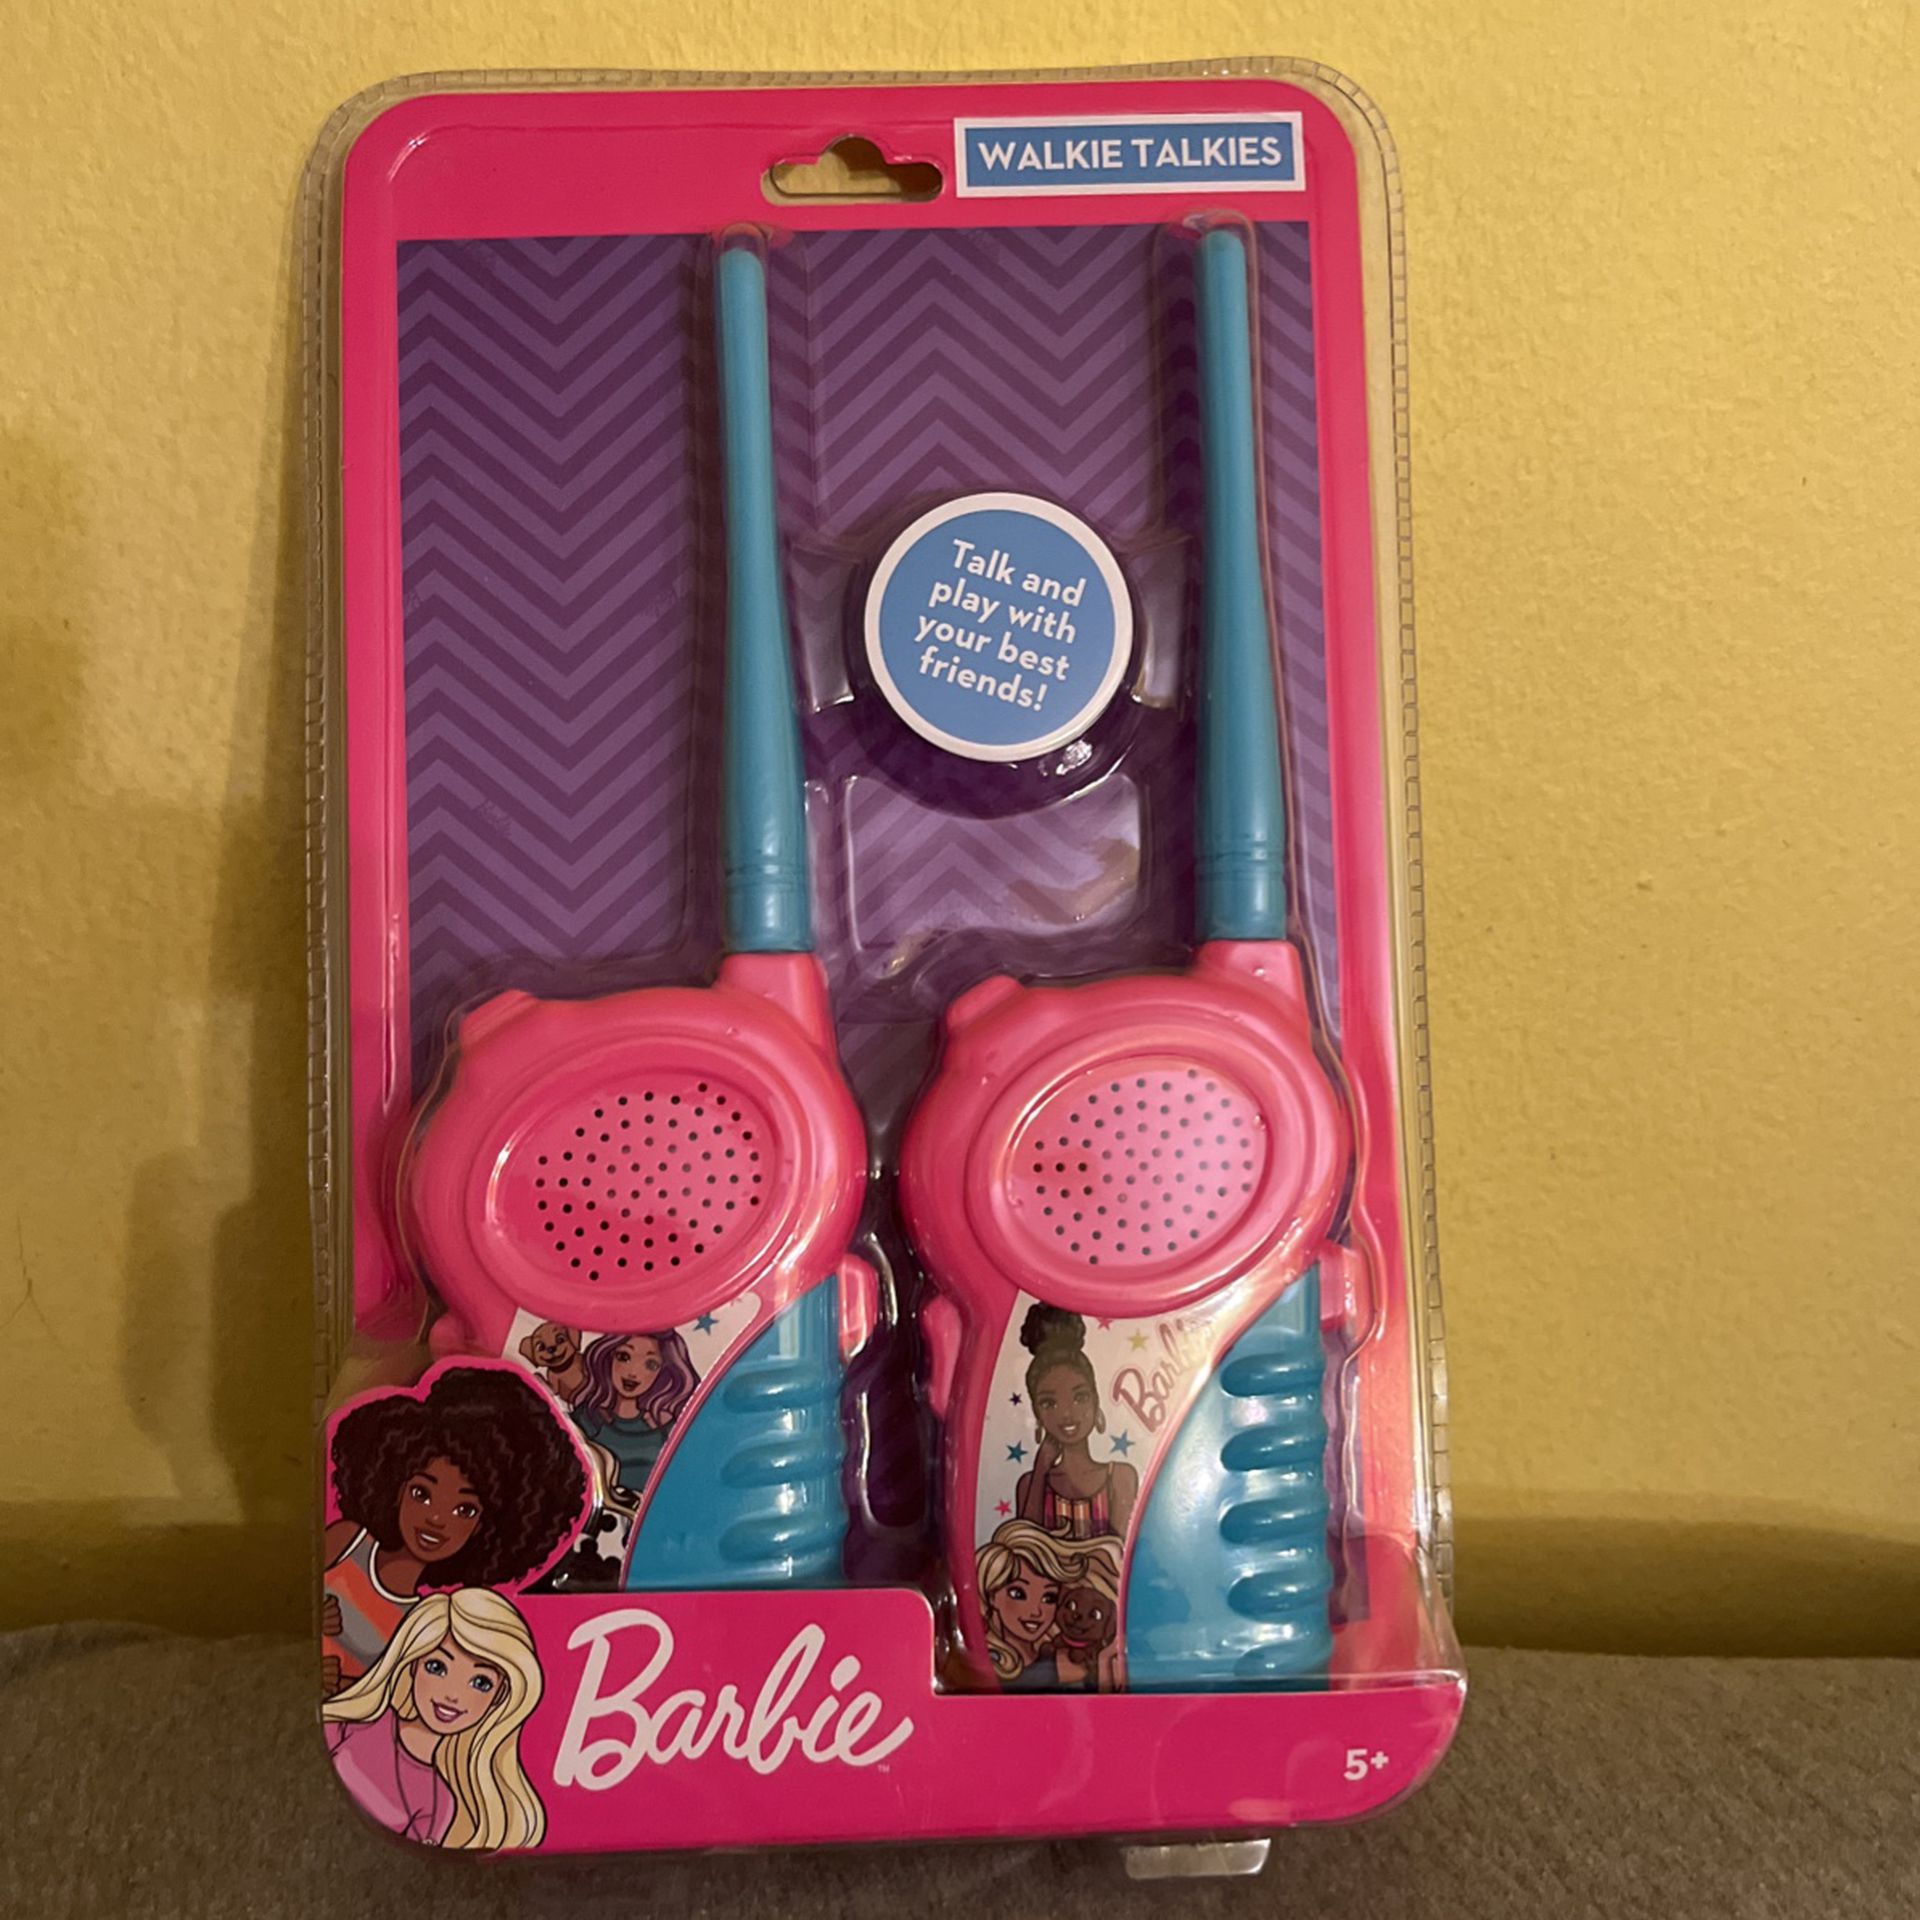 Barbie Walkie-Talkies for Sale in The Bronx, NY - OfferUp